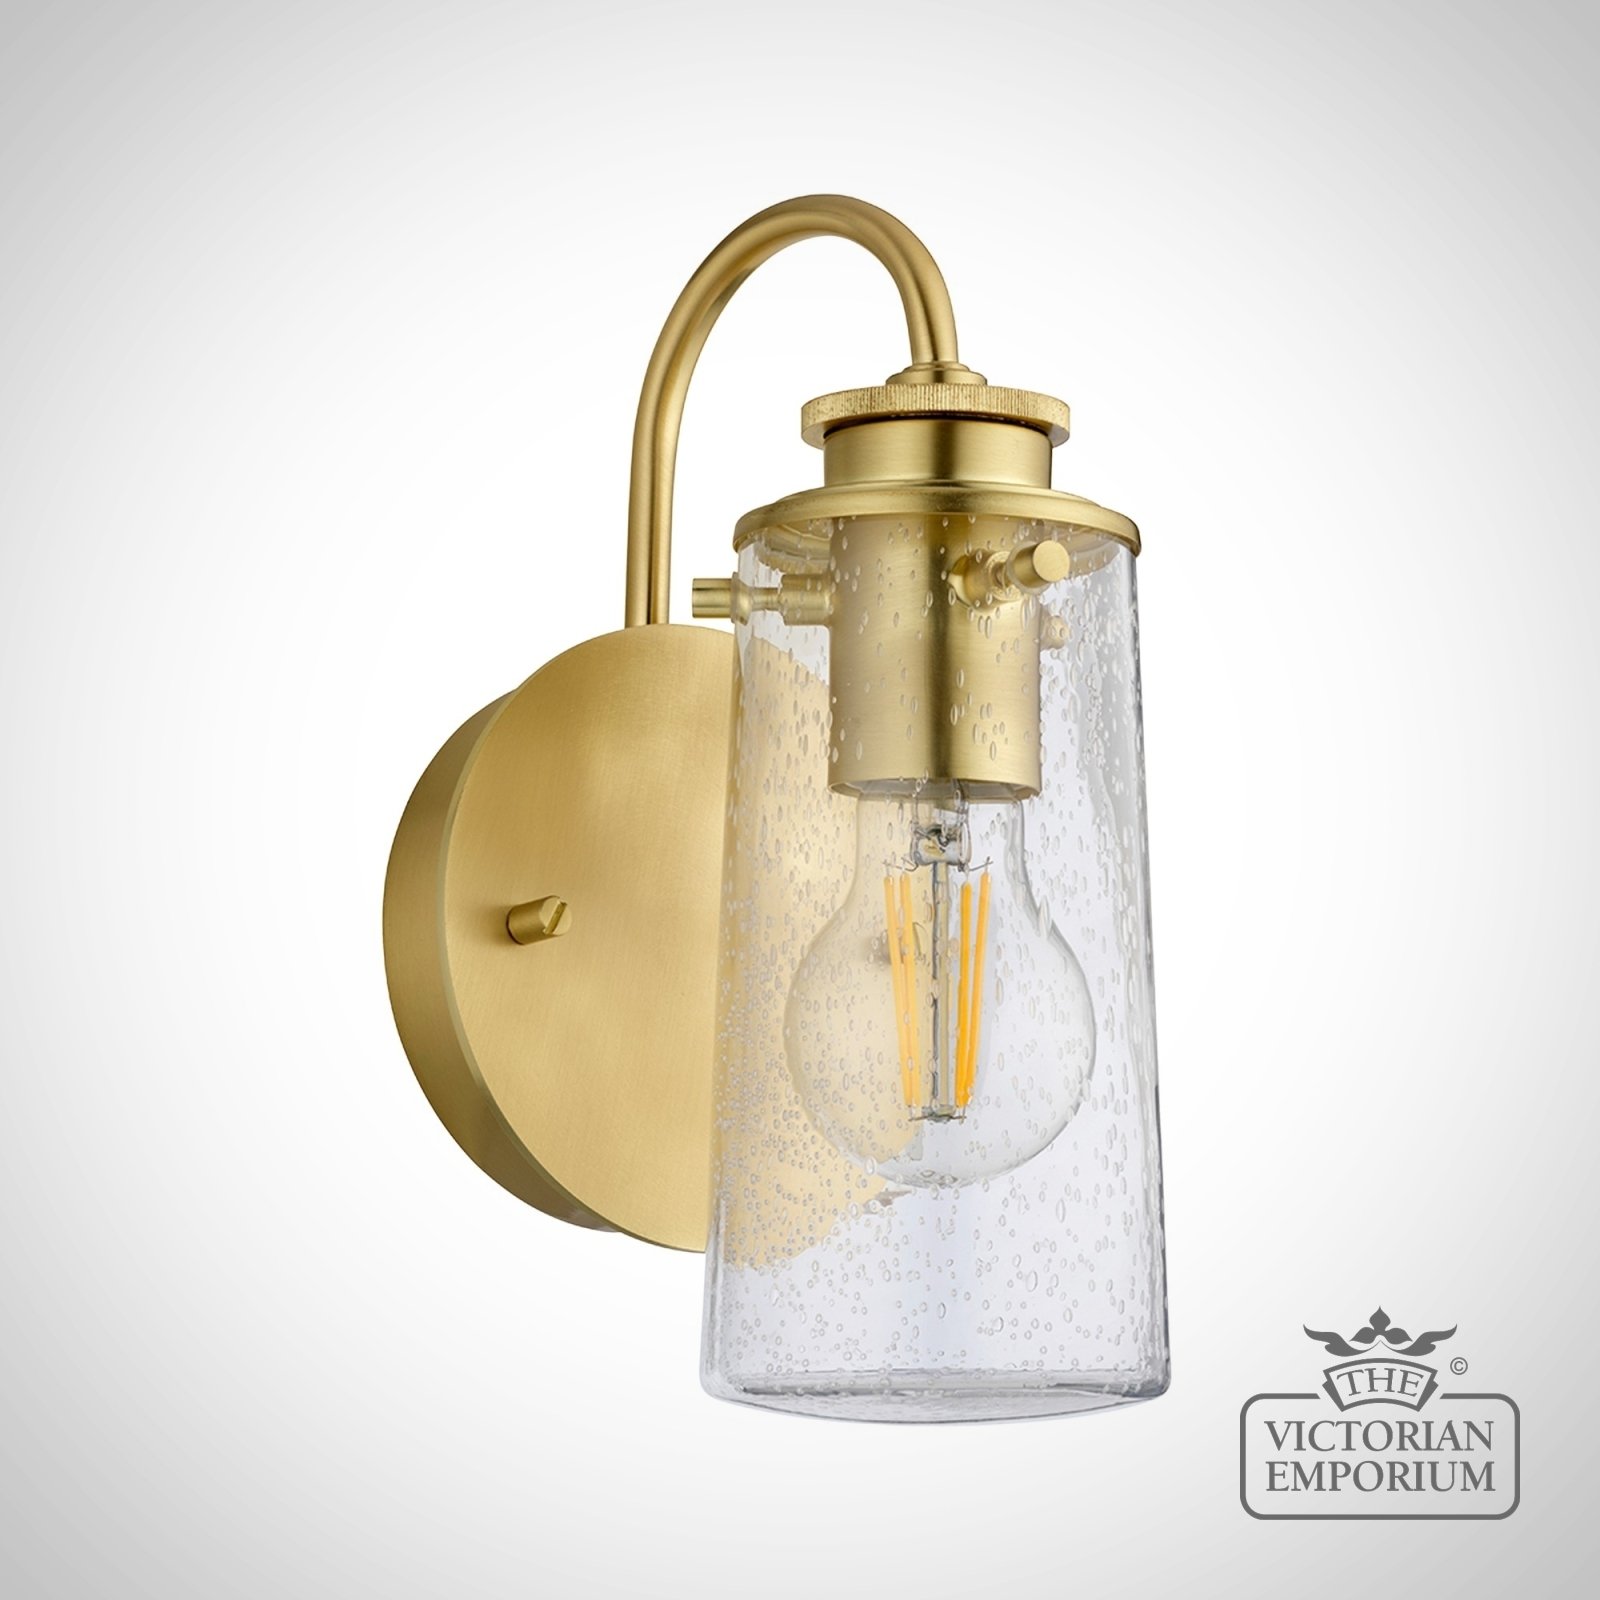 Bray Single Bathroom Wall Light in a choice of Brushed Brass or Chrome